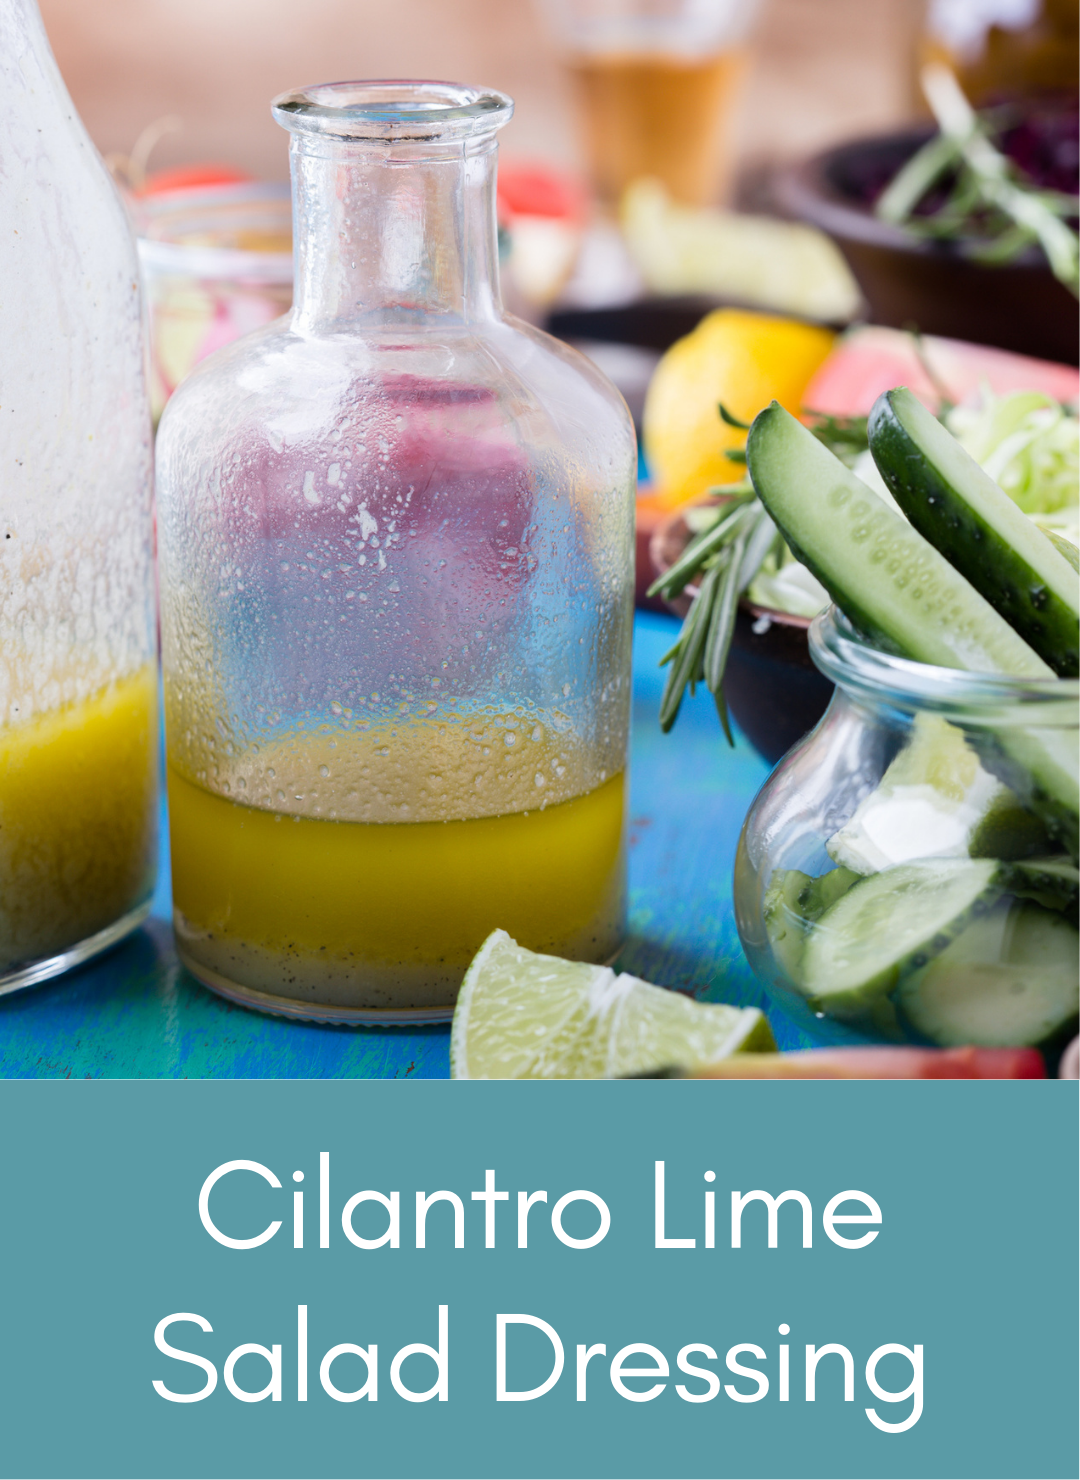 Whole food plant based cilantro lime salad dressing Picture with link to recipe